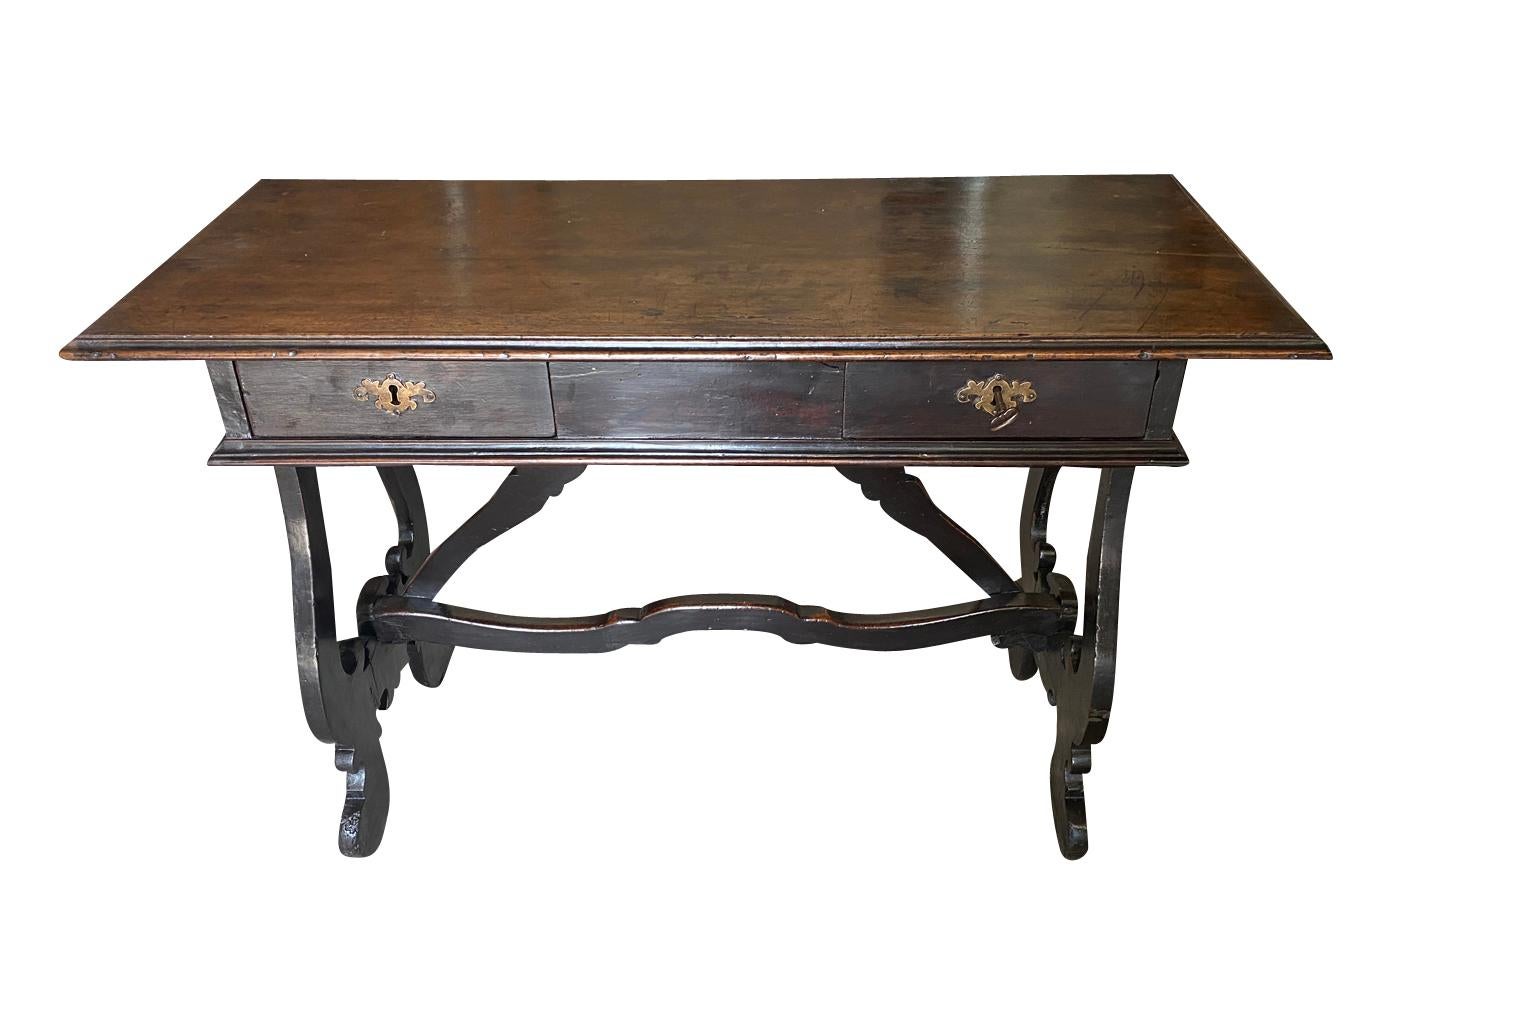 A very lovely 18th century Writing Table - Desk from Bologna, Italy.  Wonderfully constructed from handsome walnut with a conforming solid board top with handsome edge finish over  drawers, classical lyre legs and sculpted stretcher.  Fabulous